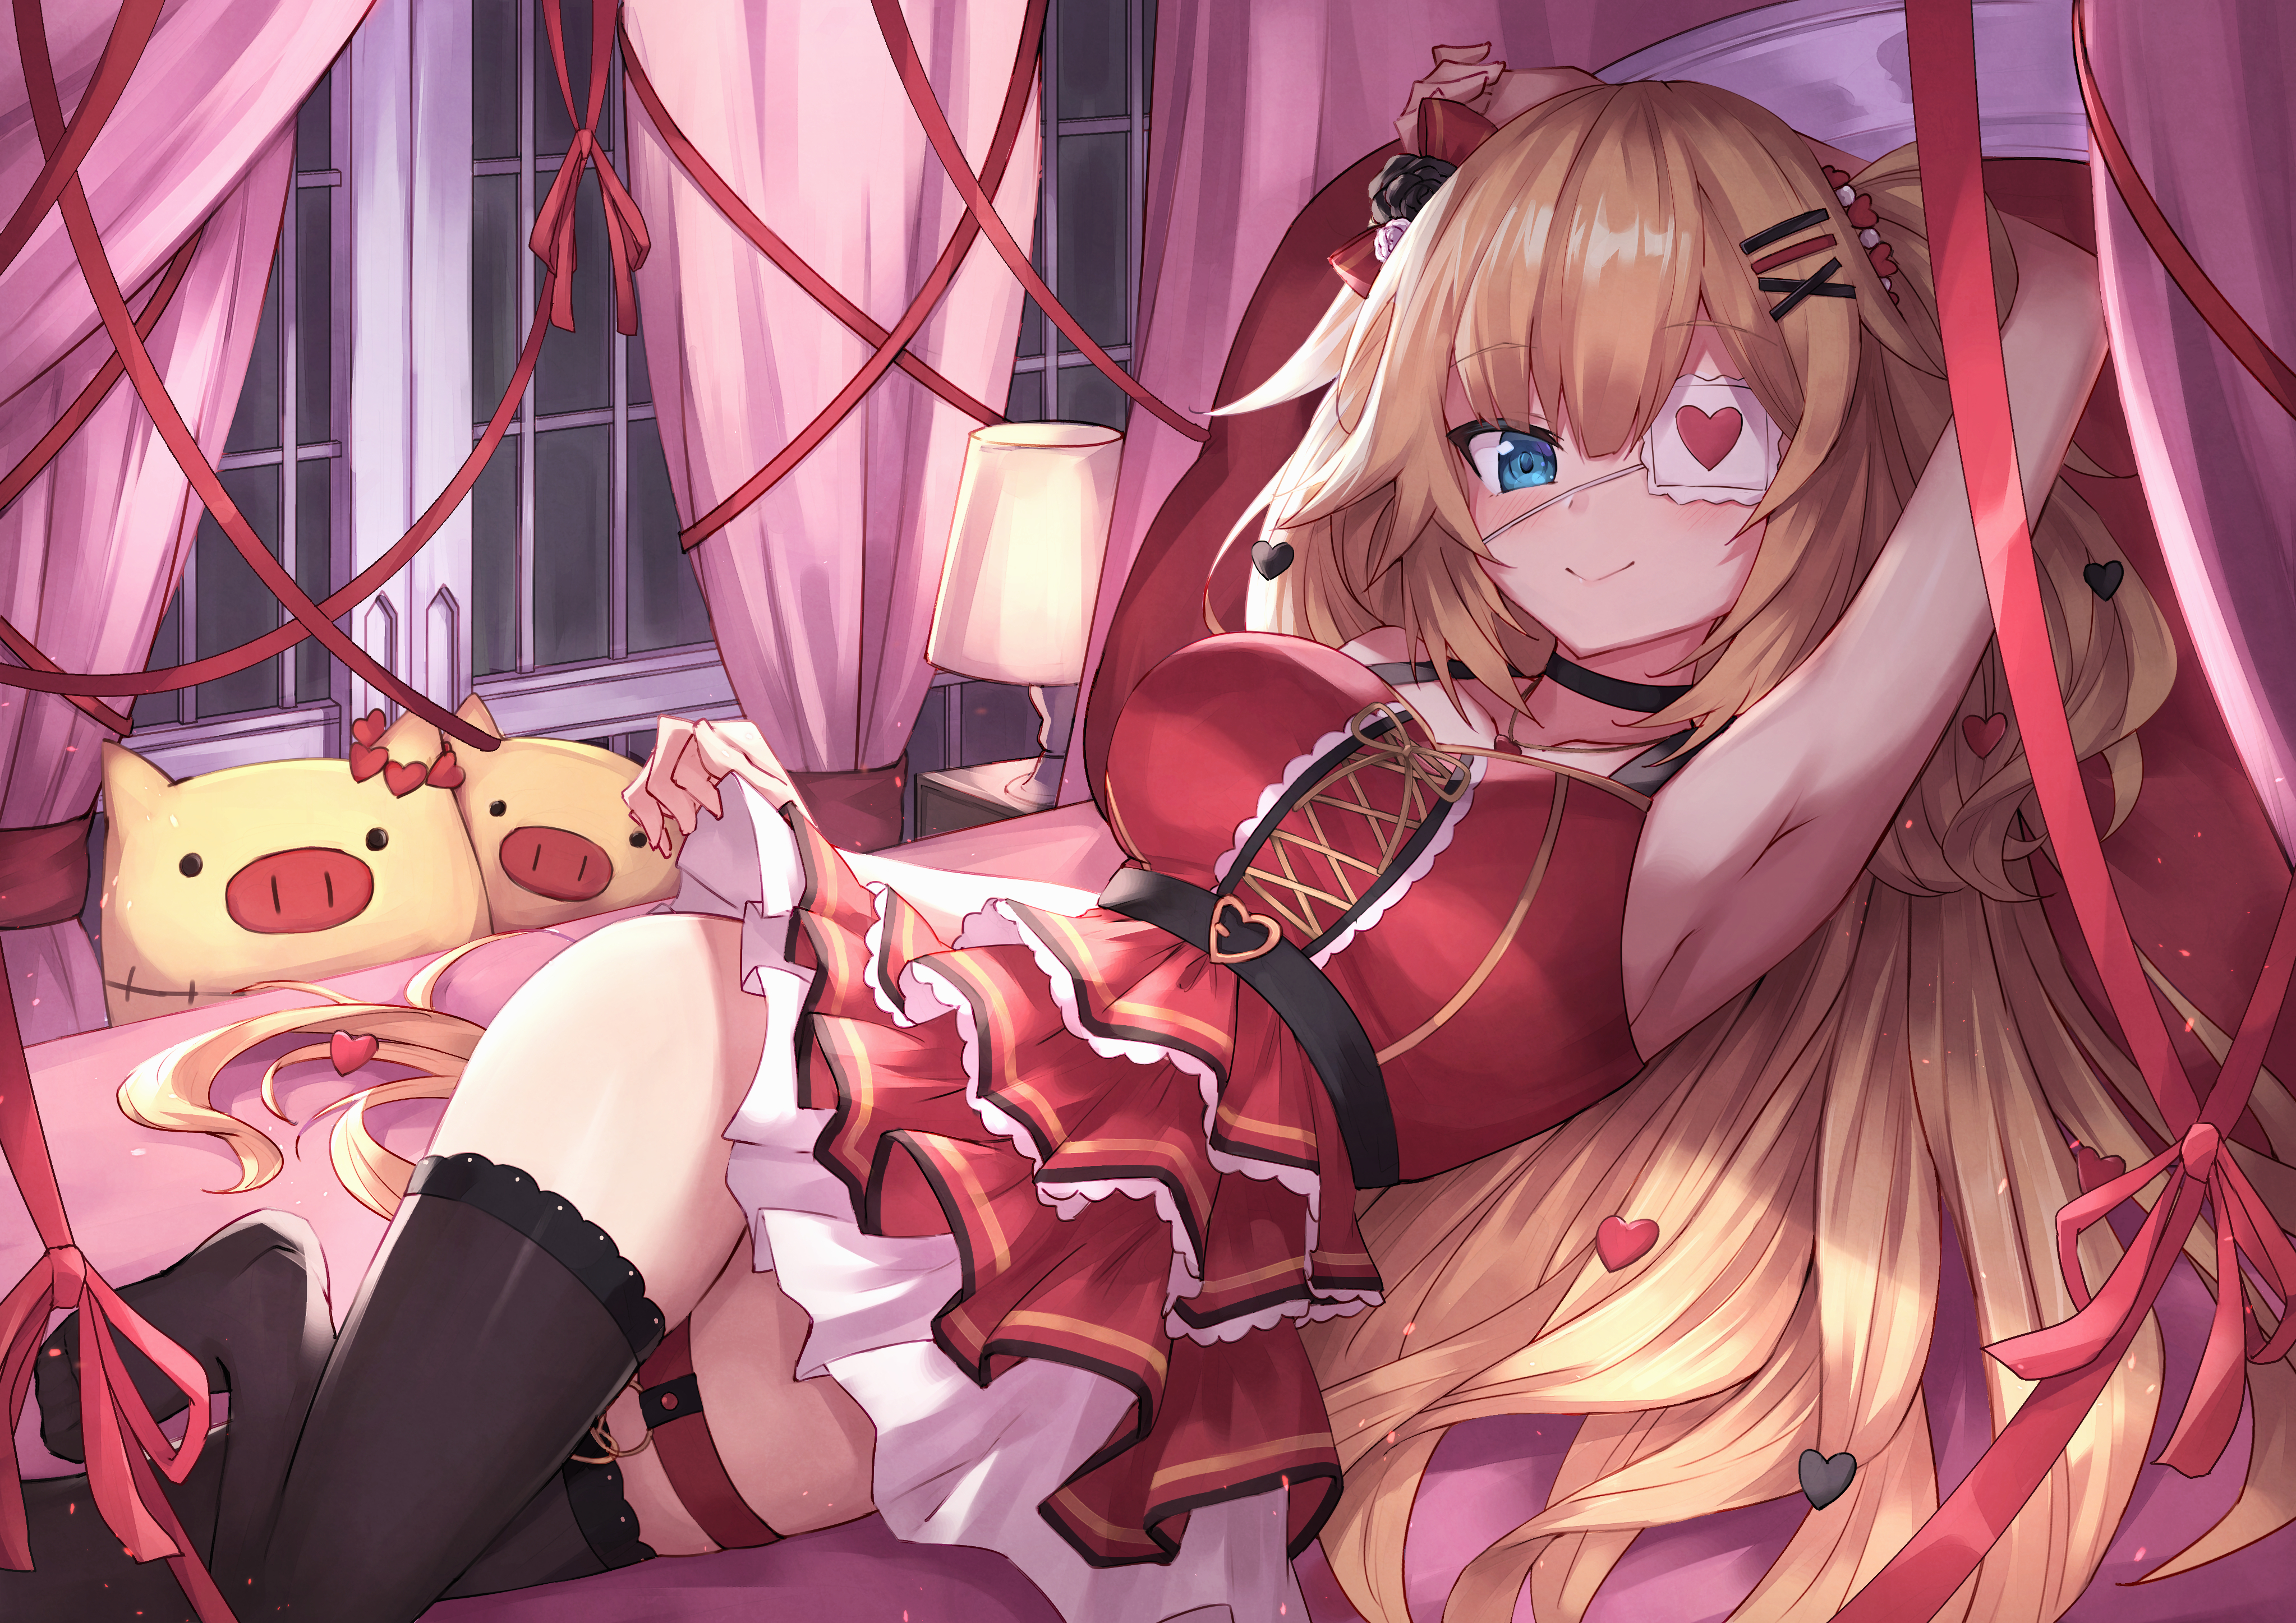 Anime 4093x2894 anime girls Hololive Akai Haato blue eyes Virtual Youtuber armpits dress thigh-highs blonde smiling eyepatches in bed Masaki big boobs